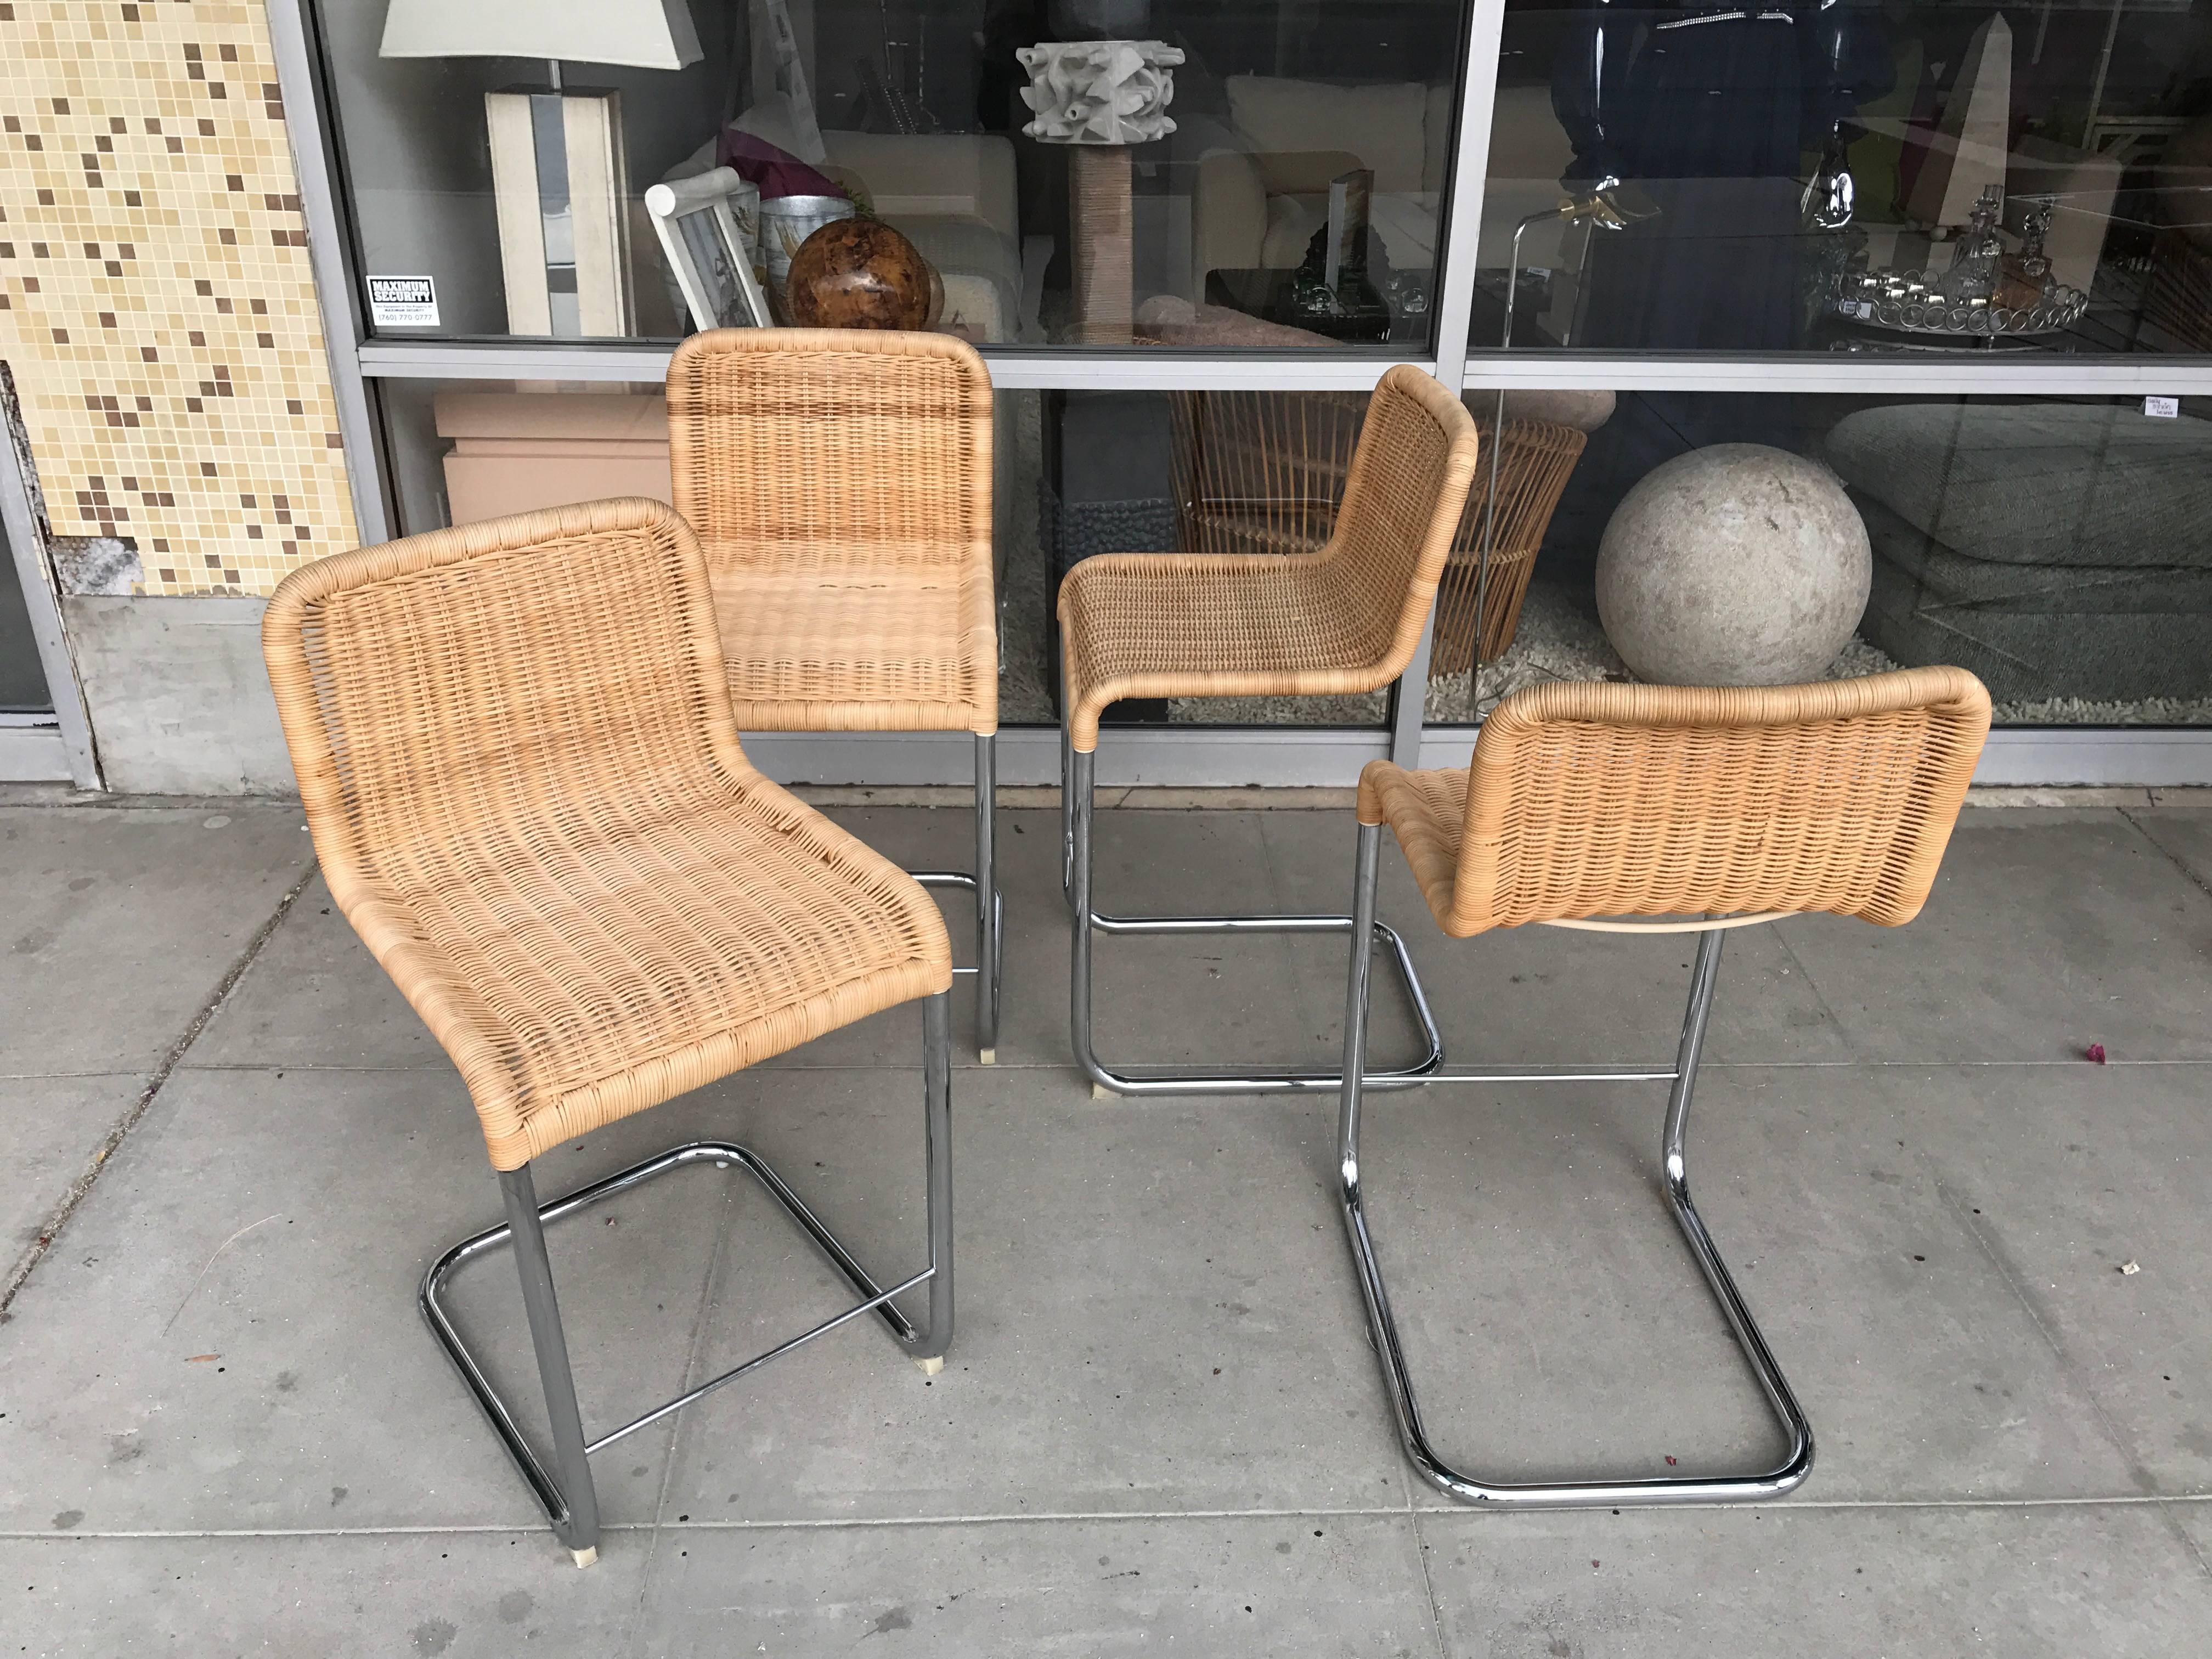 This set of four barstools came from a $4,000,000 Palm Springs Area estate and were special ordered by the architect for the modern residence. Very much in the style of the Denmark designers, Fabricius and Kastholm. Very clean and simple timeless